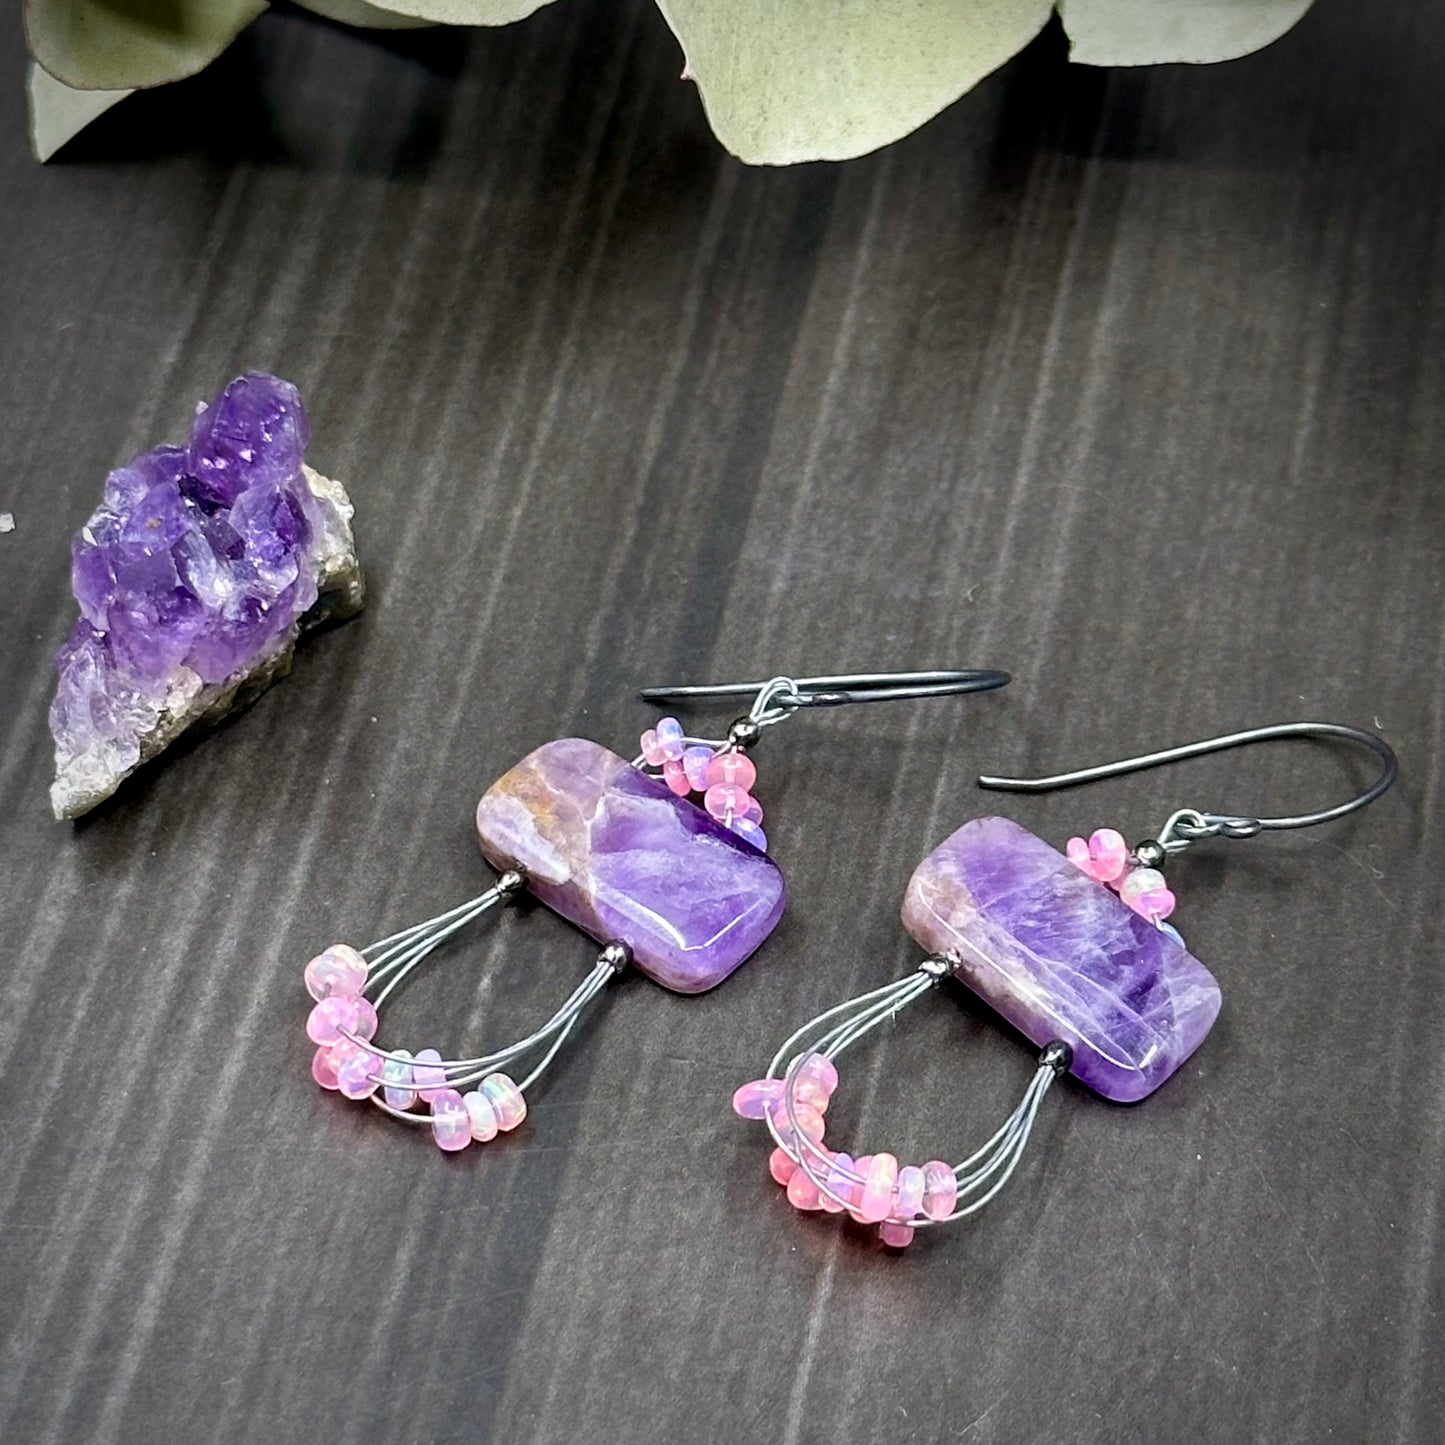 Chevron Amethyst and Pink Opal Earrings with Sterling Silver